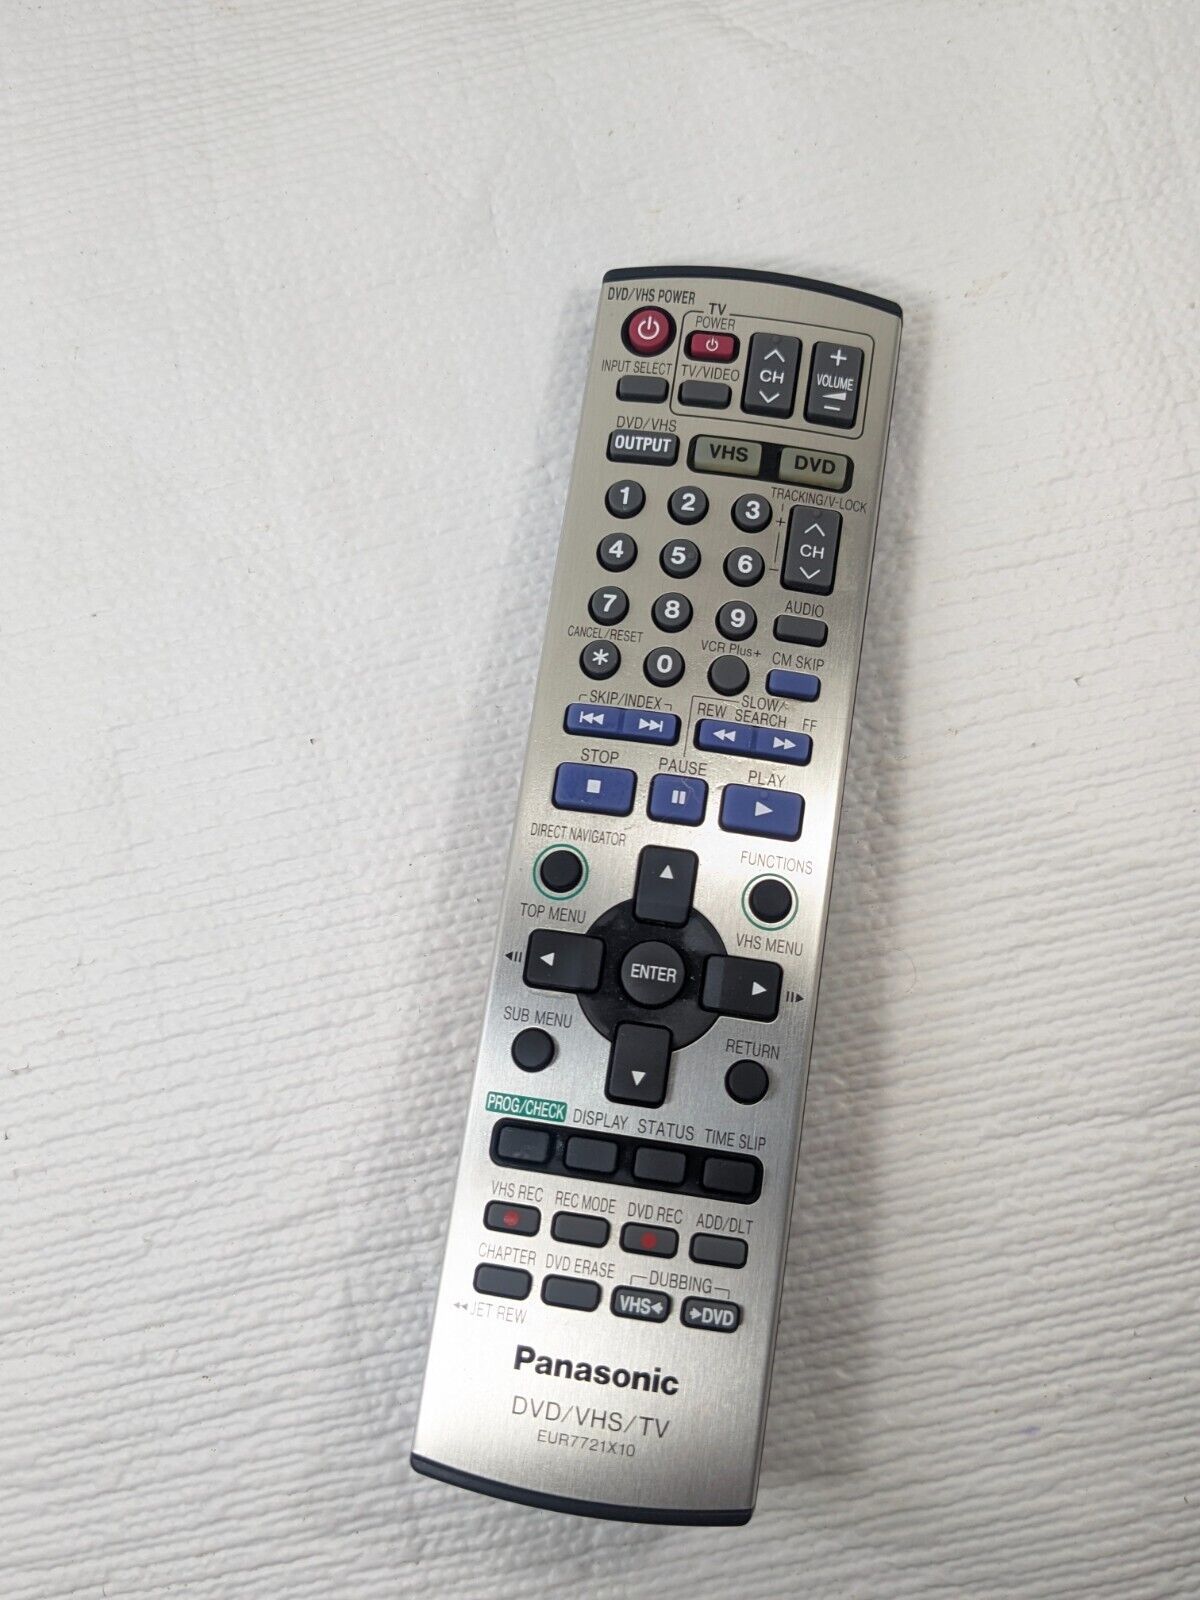 Panasonic EUR7721X10 Remote Control DVD VHS TV silver Genuine OEM TESTED WORKS - $30.00